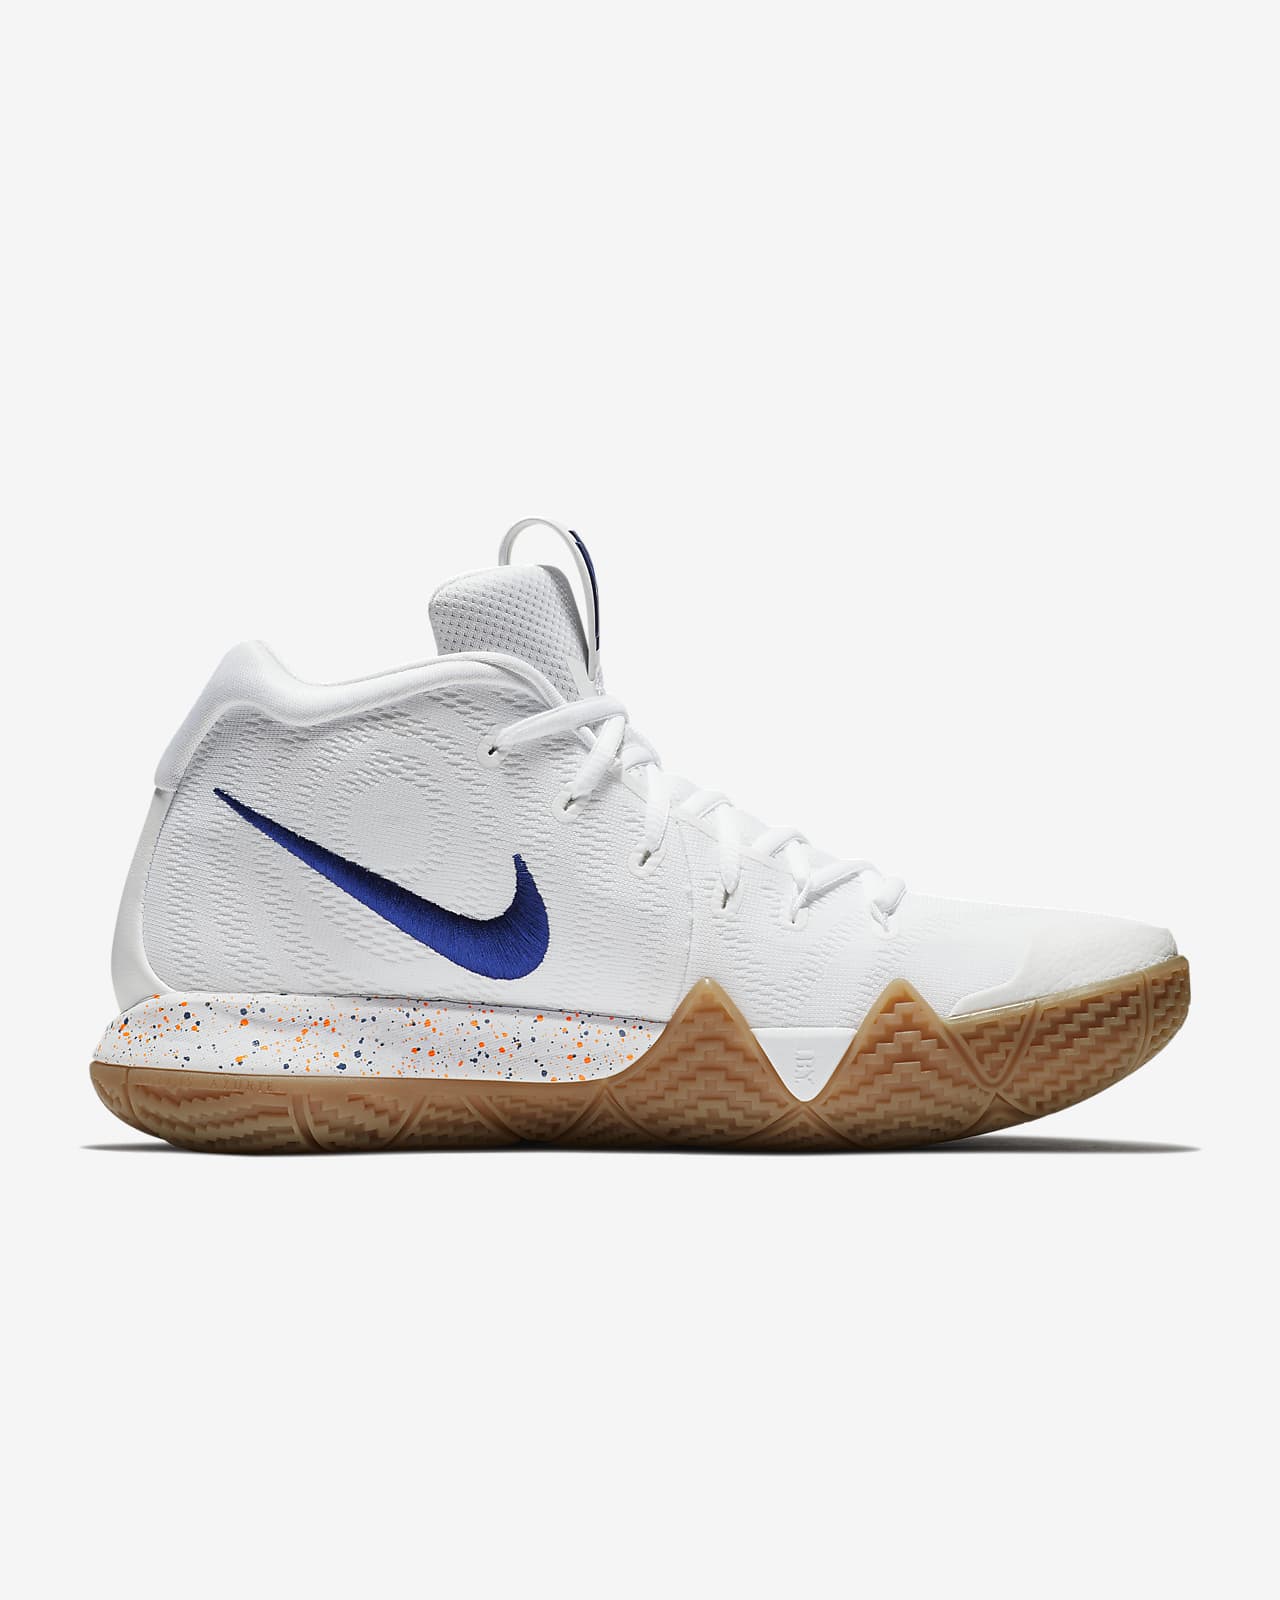 Kyrie 4 'Uncle Drew' Basketball Shoe 